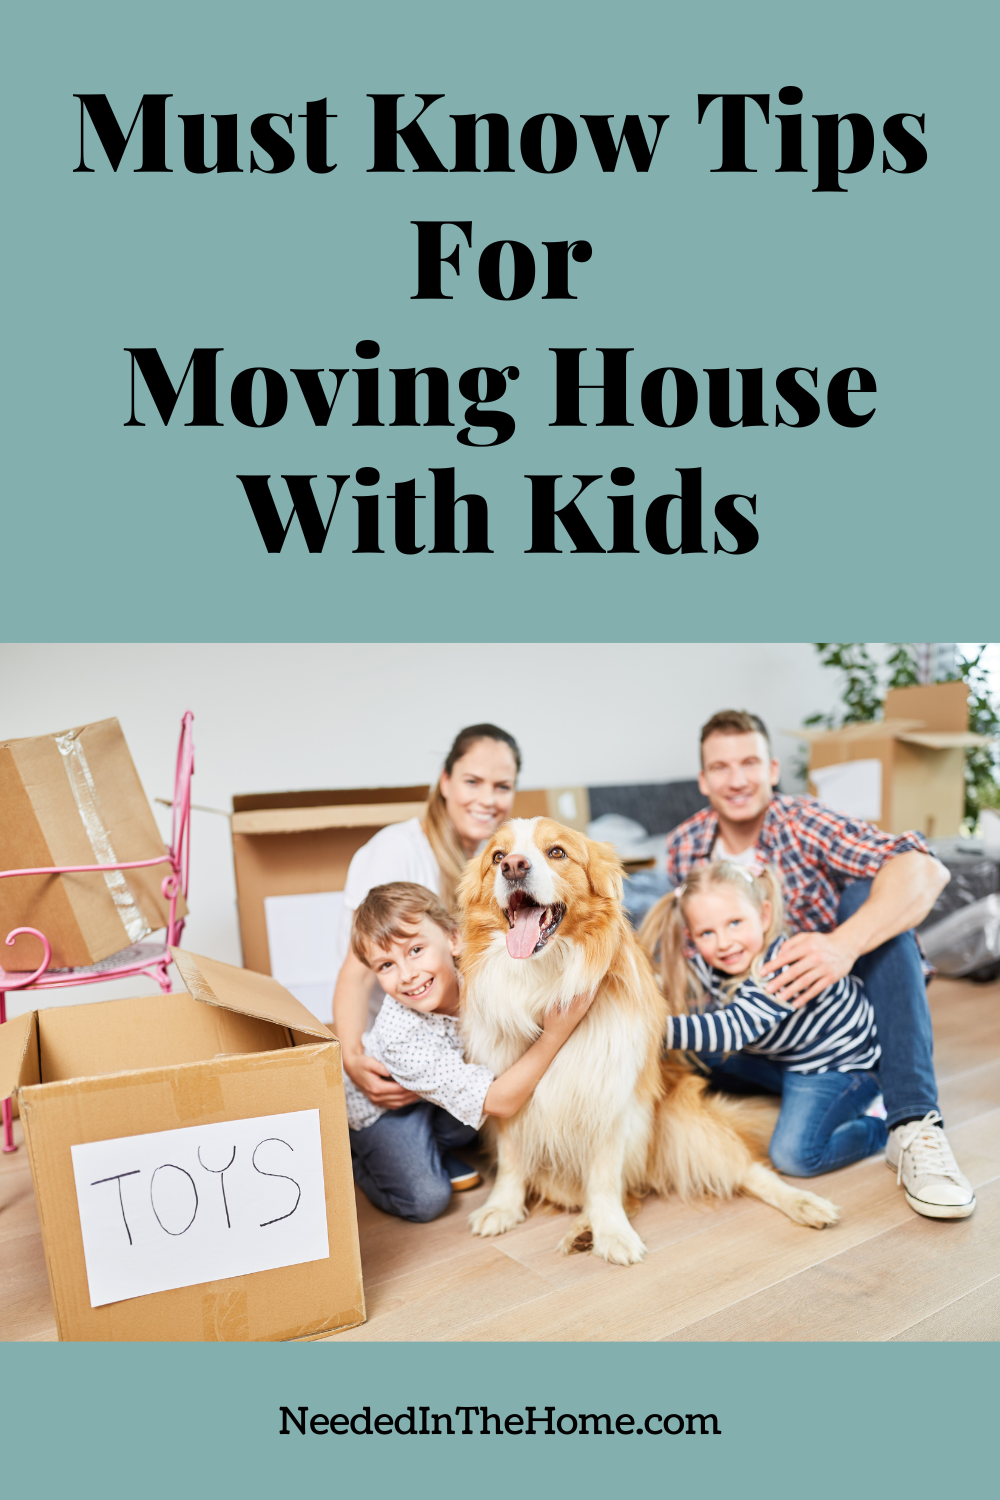 pinterest-pin-description must know tips for moving house with kids family moving boxes dog neededinthehome